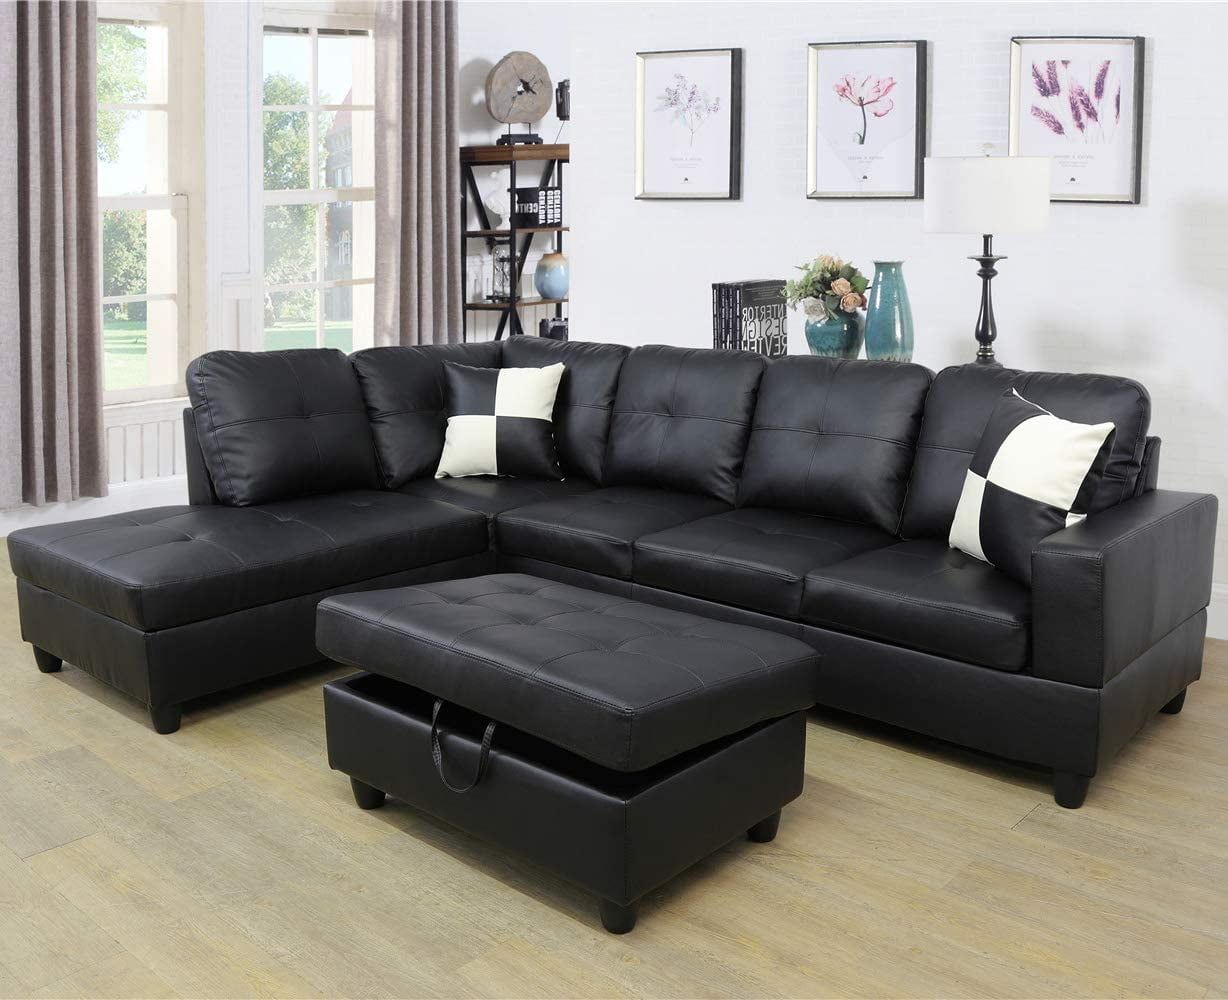 Gcf Faux Leather 3 Piece Sectional Sofa Couch Set, L Shaped Modern Sofa  With Chaise Storage Ottoman And Pillows For Living Room Furniture, Left  Hand Facing Sectional Sofa Set Black – Walmart For 3 Piece Leather Sectional Sofa Sets (View 2 of 15)